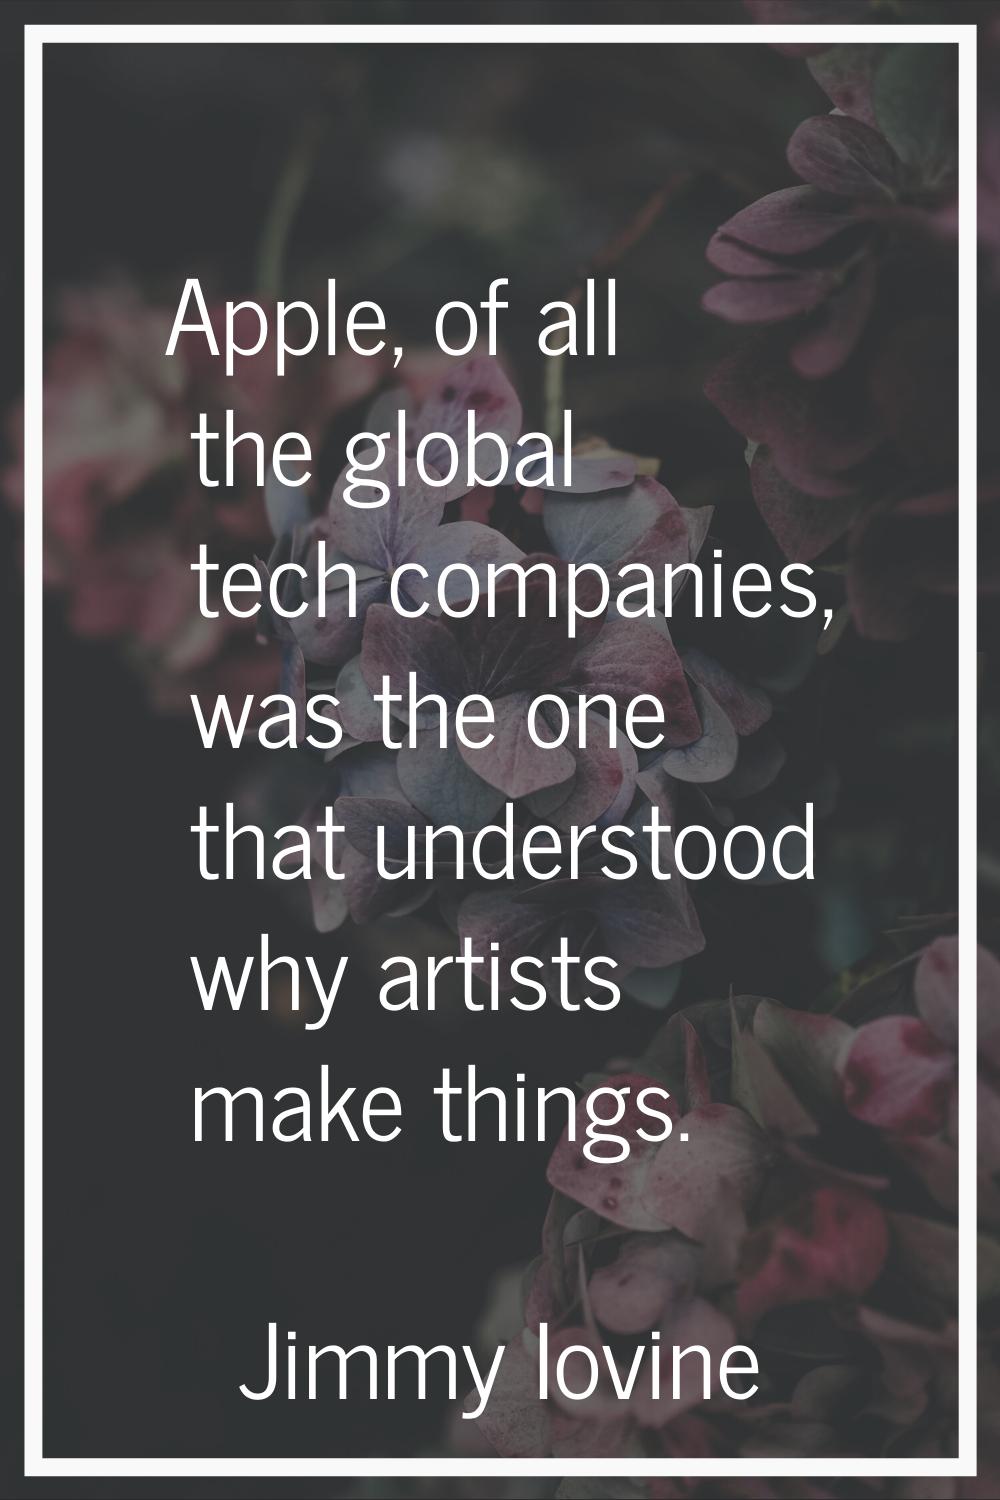 Apple, of all the global tech companies, was the one that understood why artists make things.